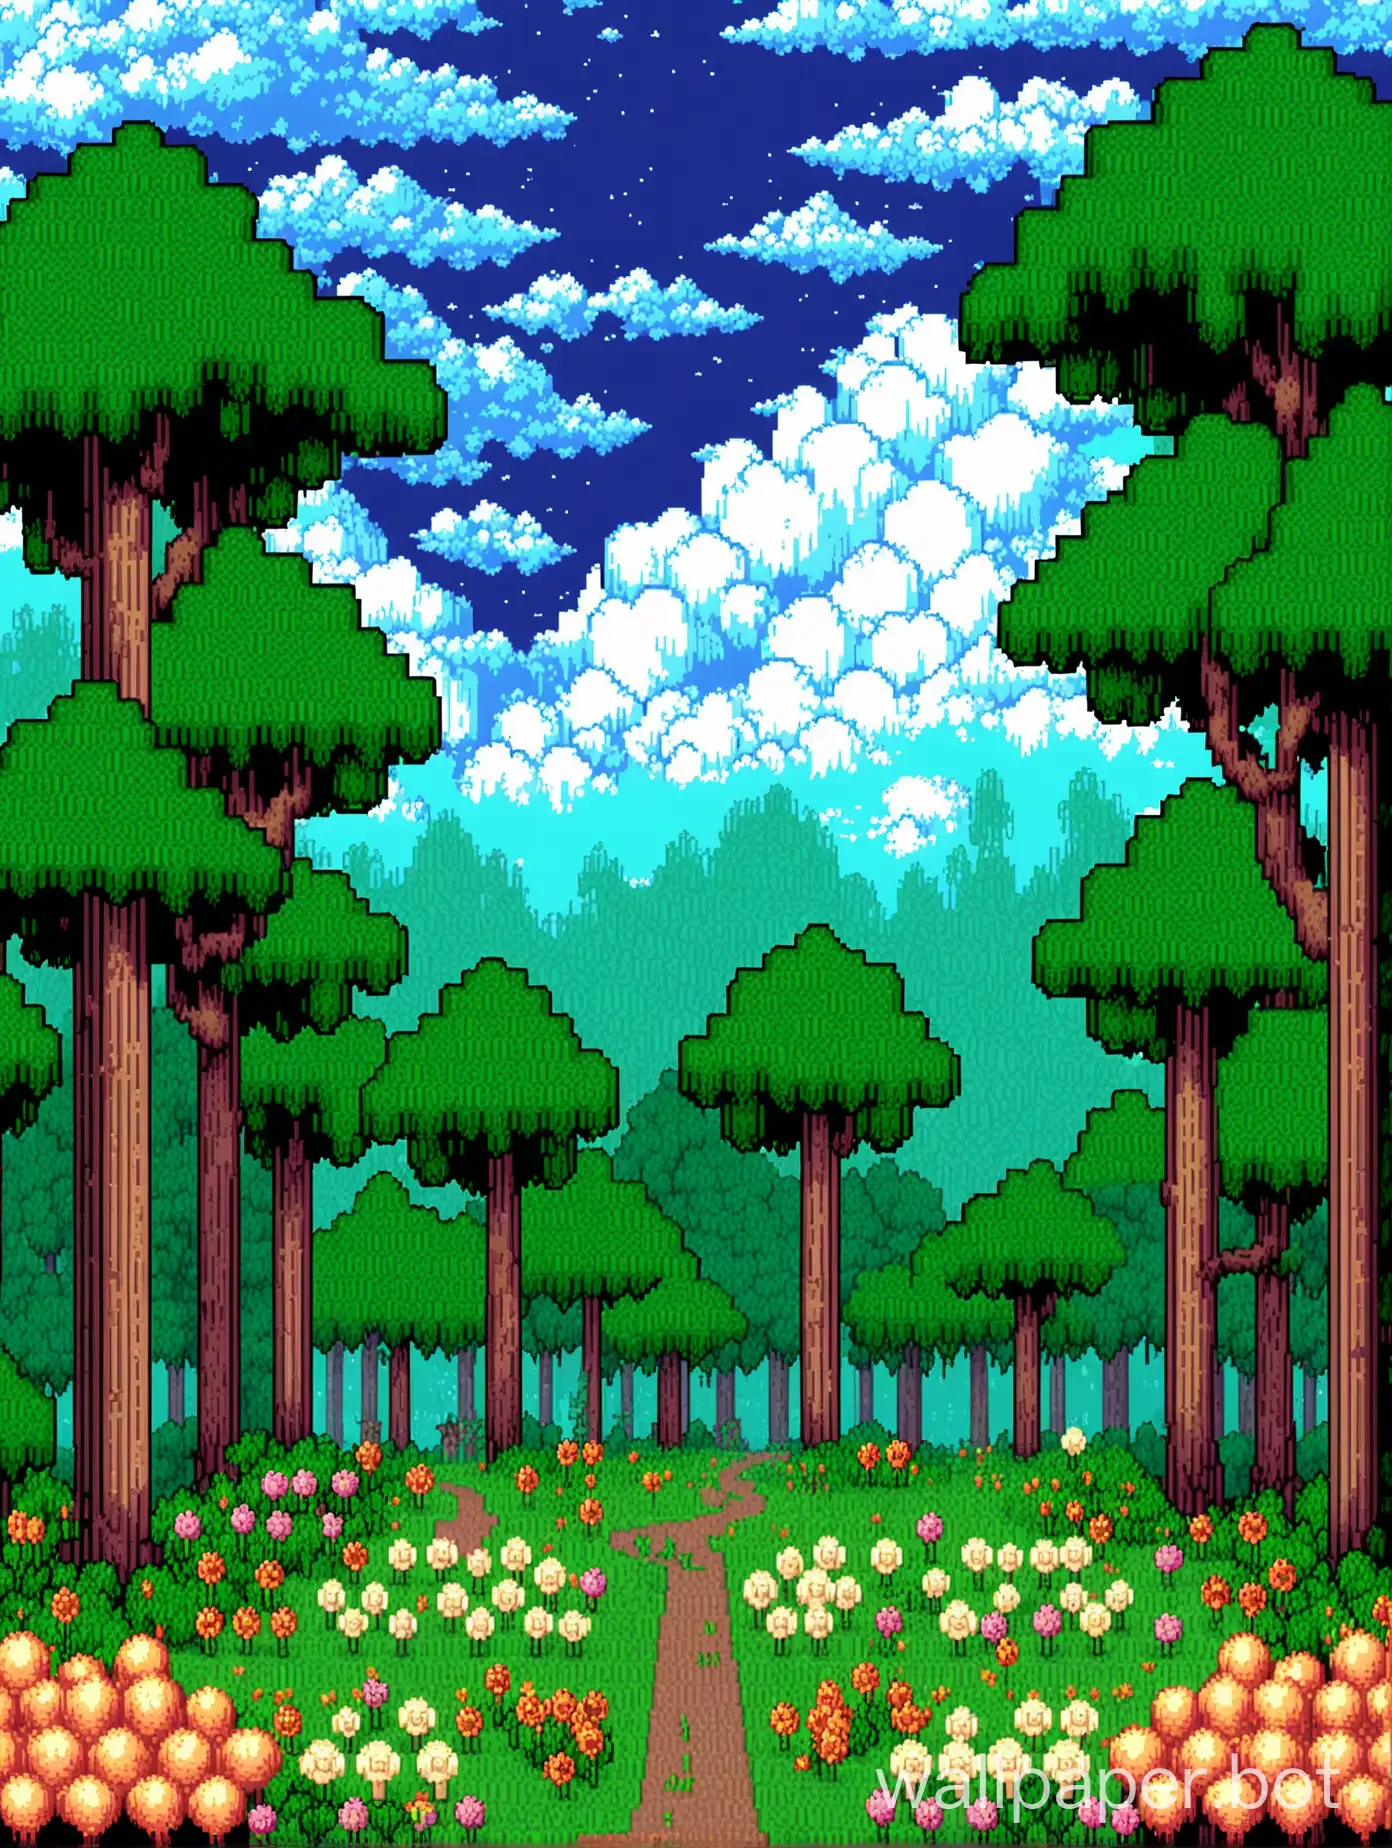 Enchanting-8Bit-Forest-Adventure-with-Clouds-Trees-and-Flowers